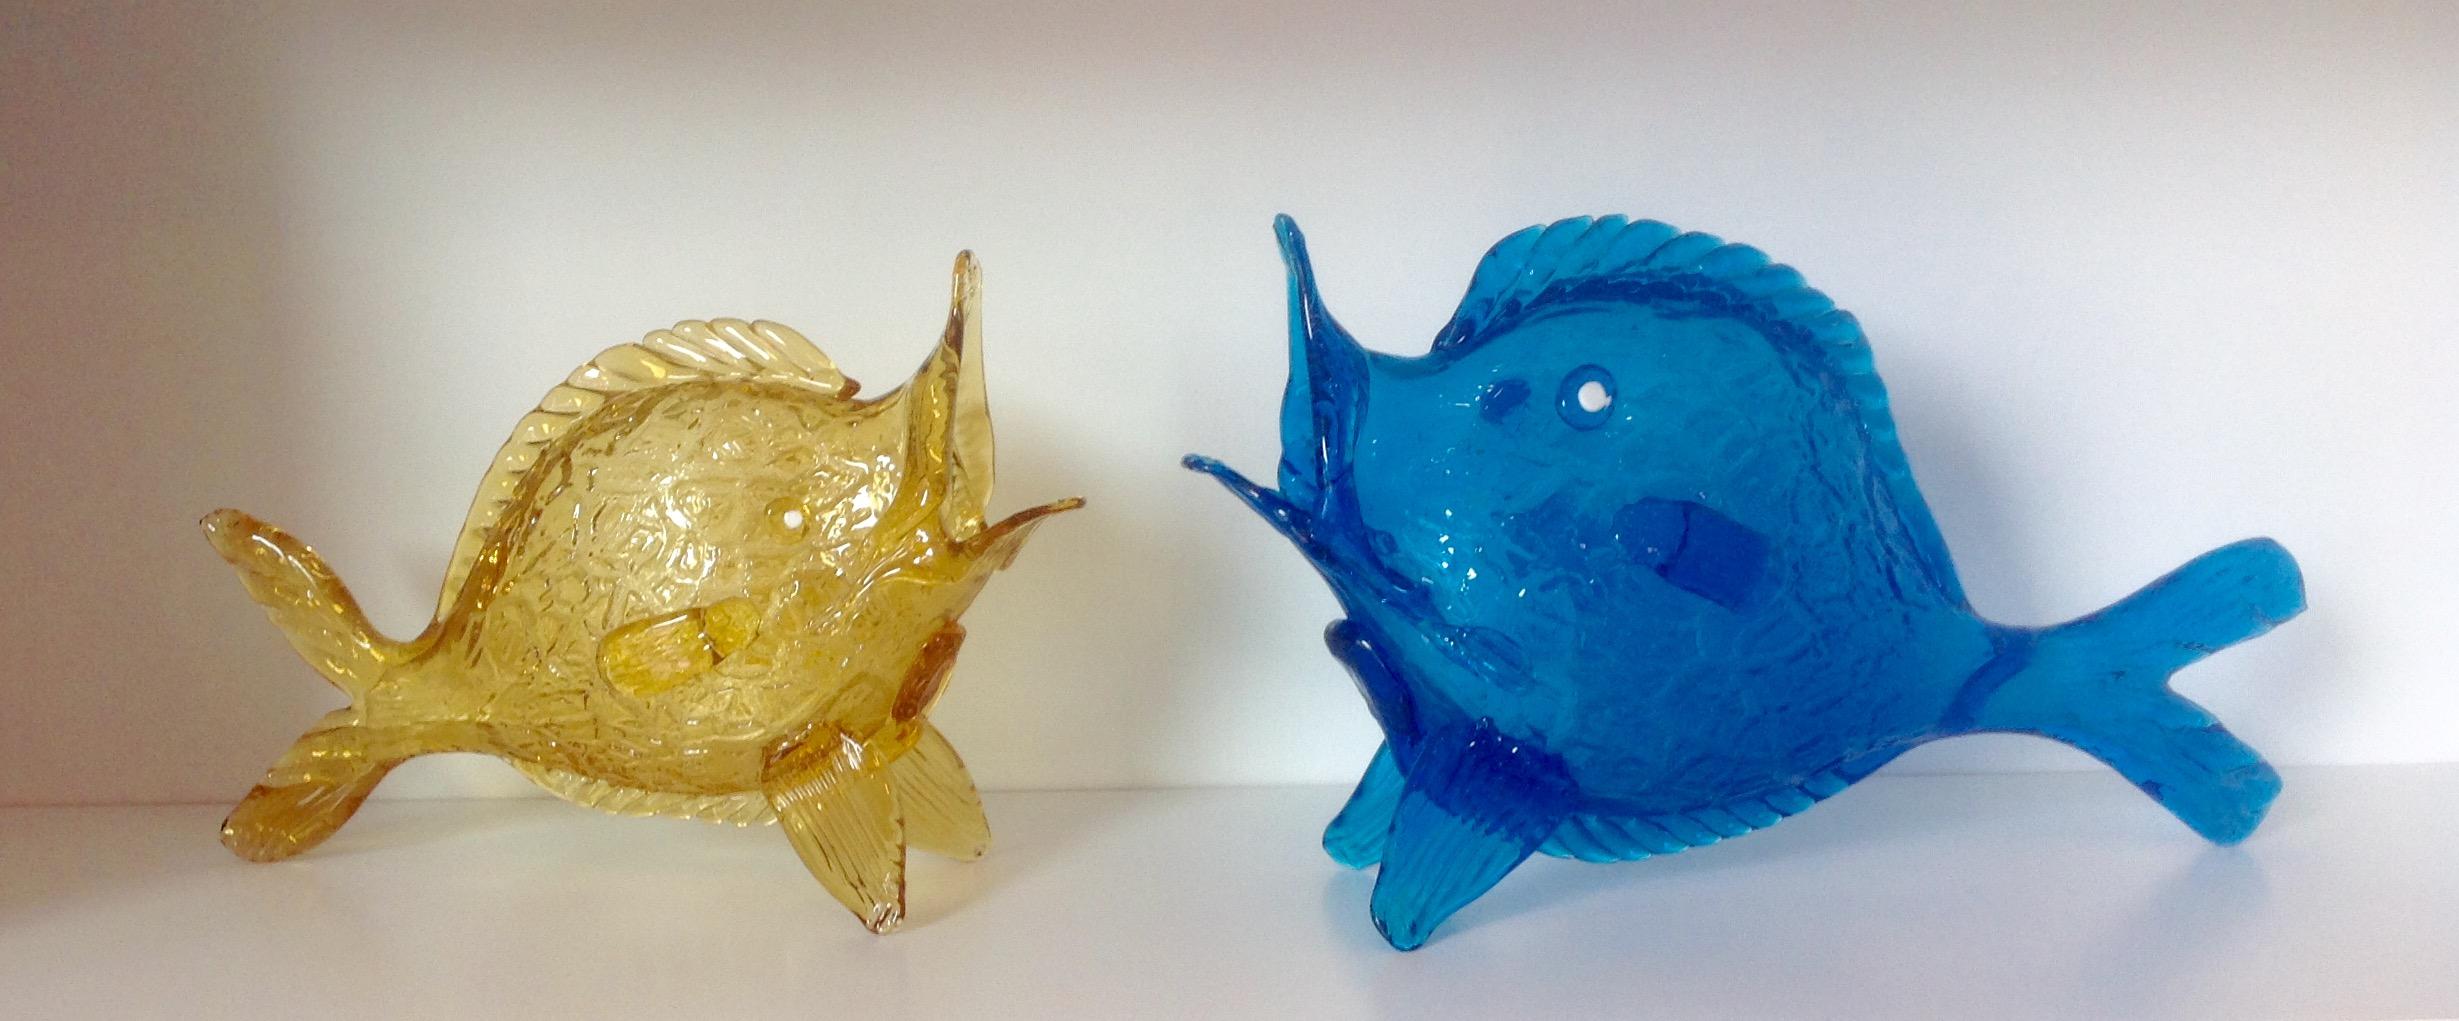 Rare pair of fish sculptures by Fratelli Toso circa 1930s in Murano glass. Blue fish is 13 inches wide, by 7.75 inches tall by 3.5 inches deep. Yellow fish is 10.25 inches wide, by 7.25 inches tall, by 3 inches deep.